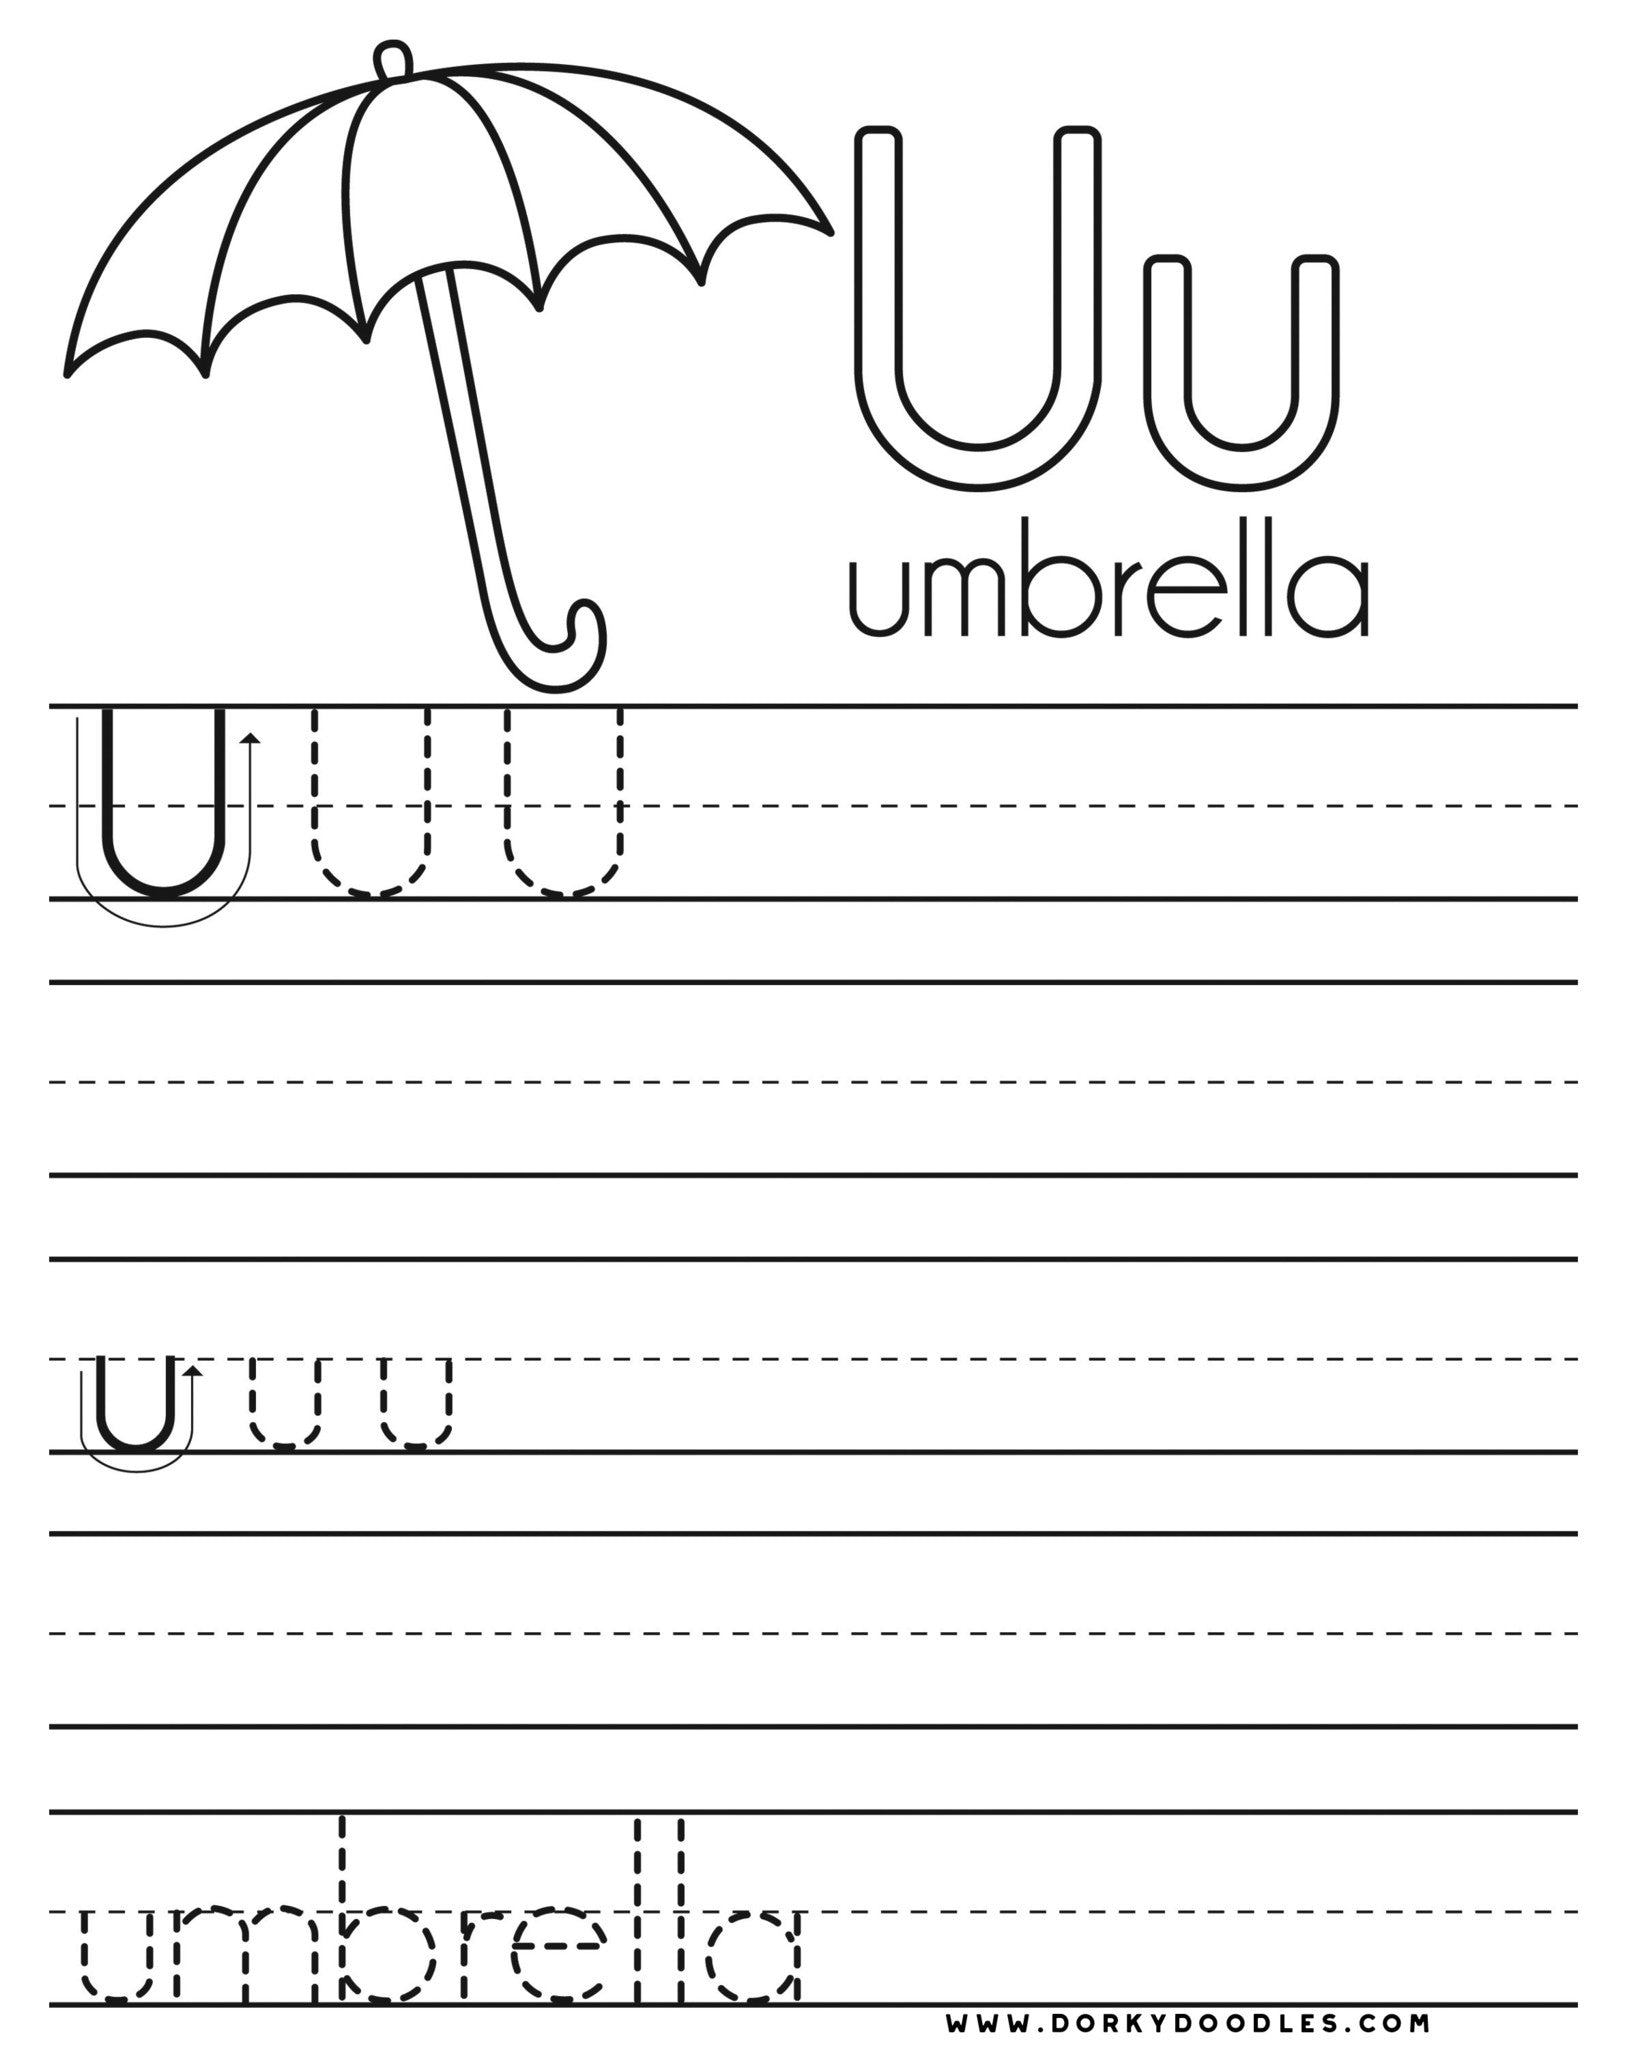 13-best-images-of-6-year-old-worksheets-wild-animal-worksheets-12